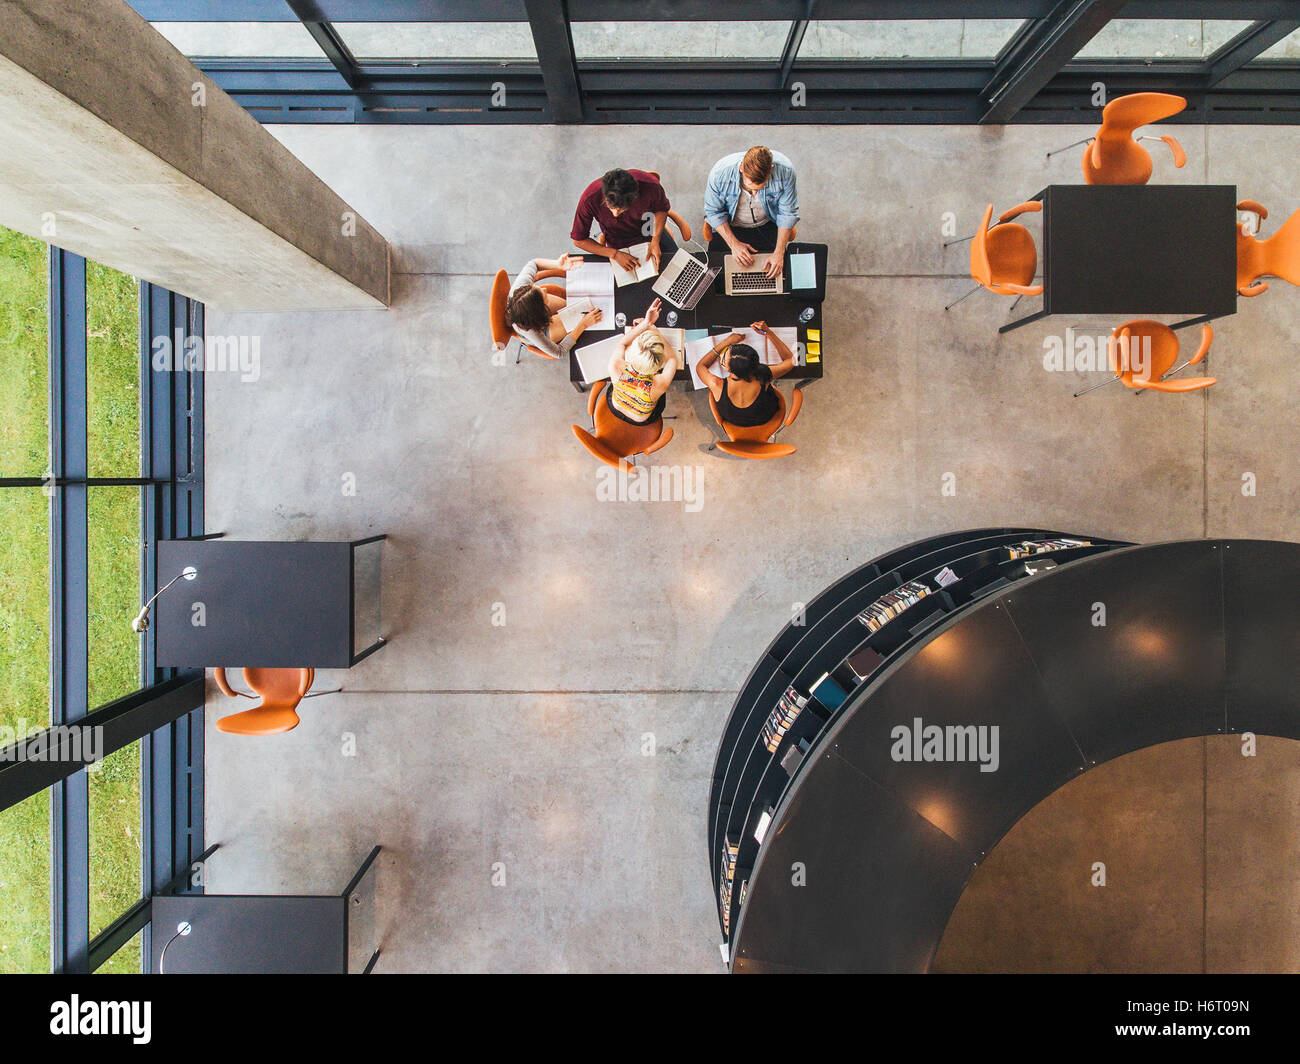 Top view of college students sitting in a library with books and laptop. Young people studying together at public library. Stock Photo